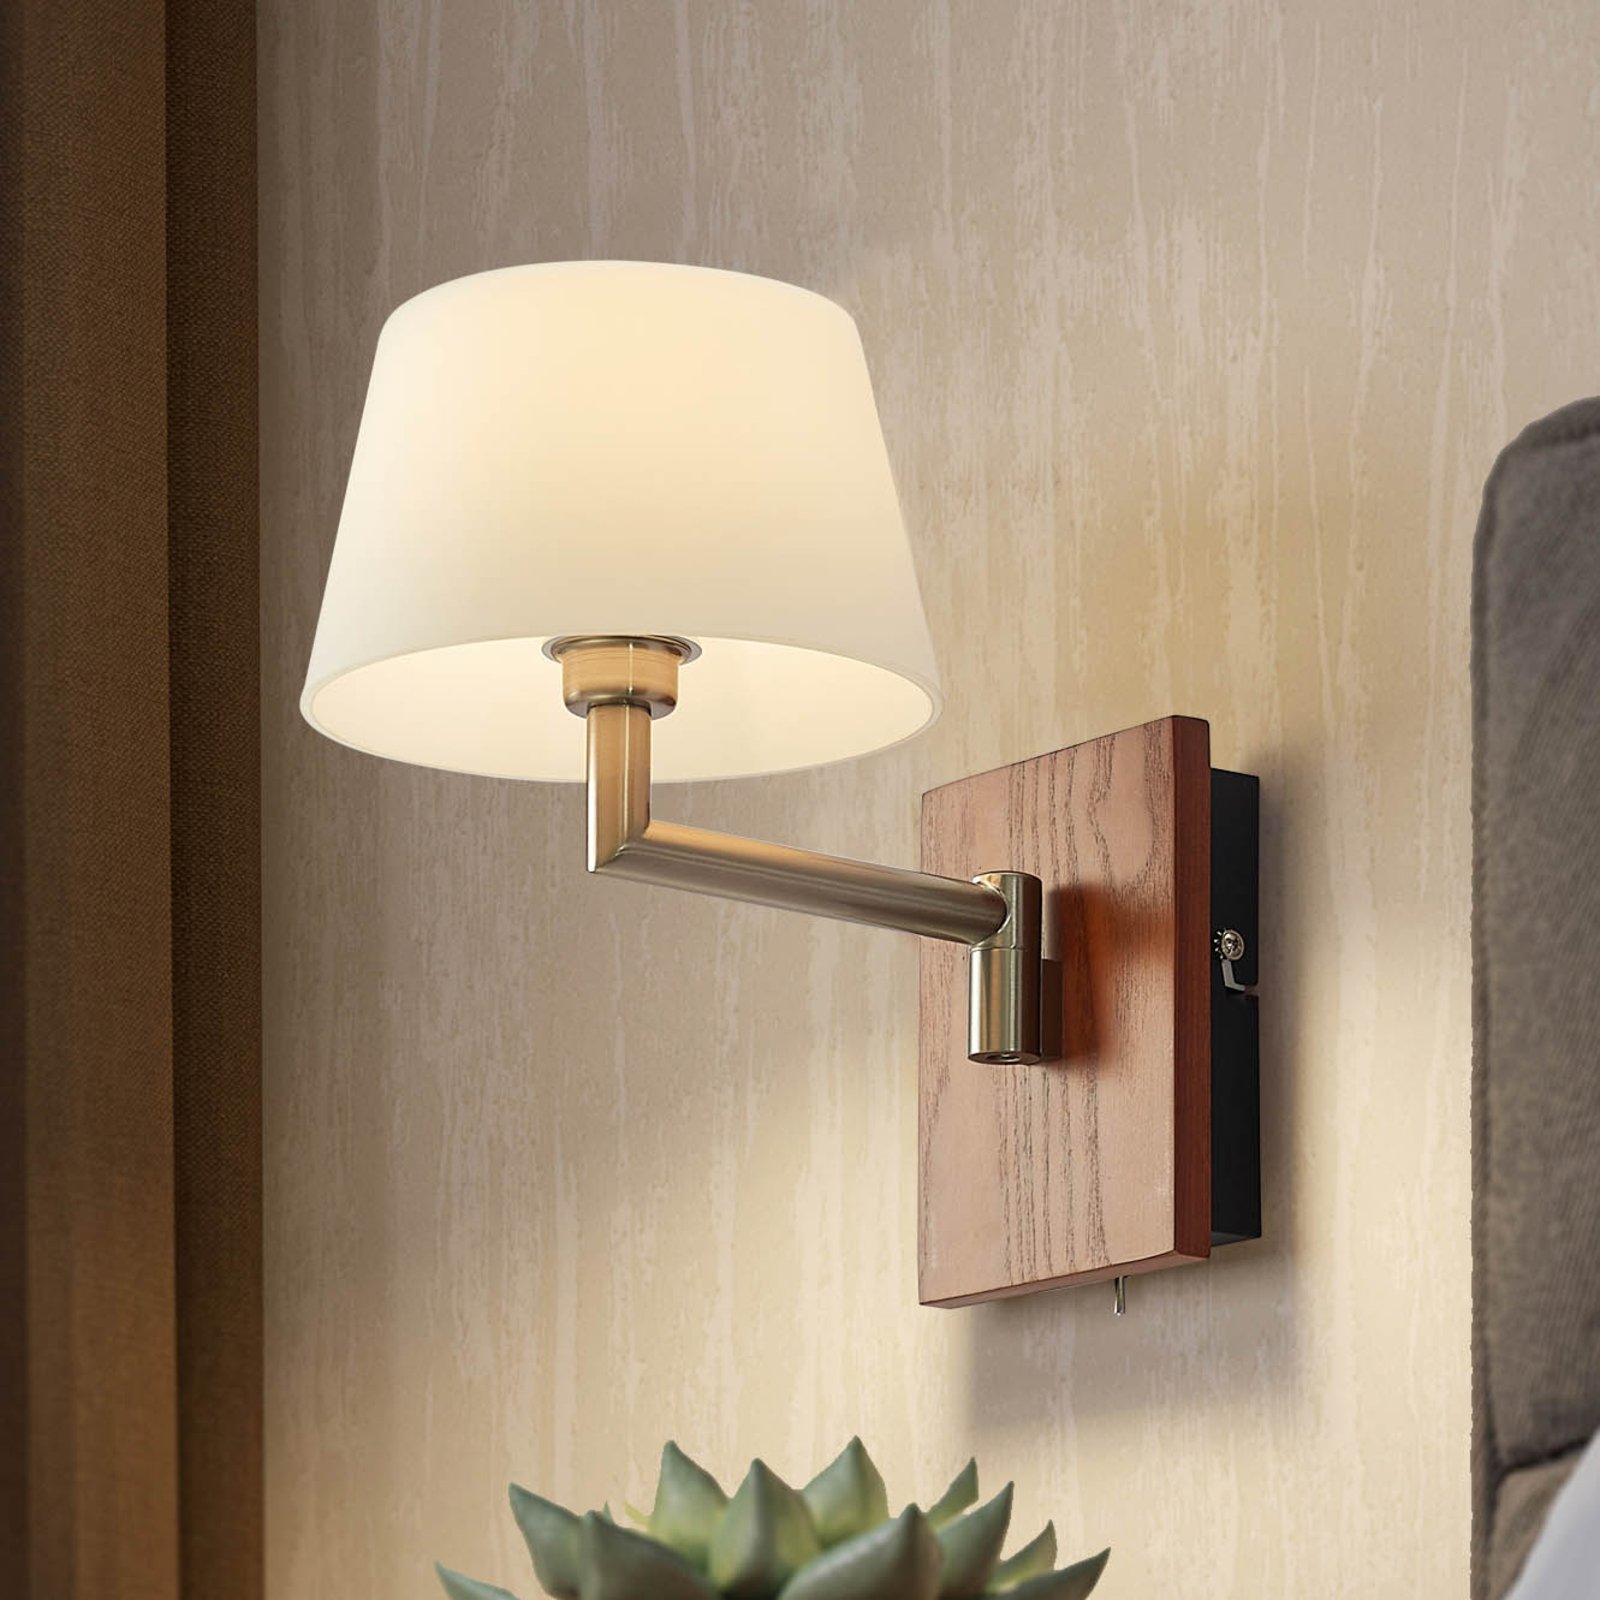 Lucande Madita wall light with a movable arm